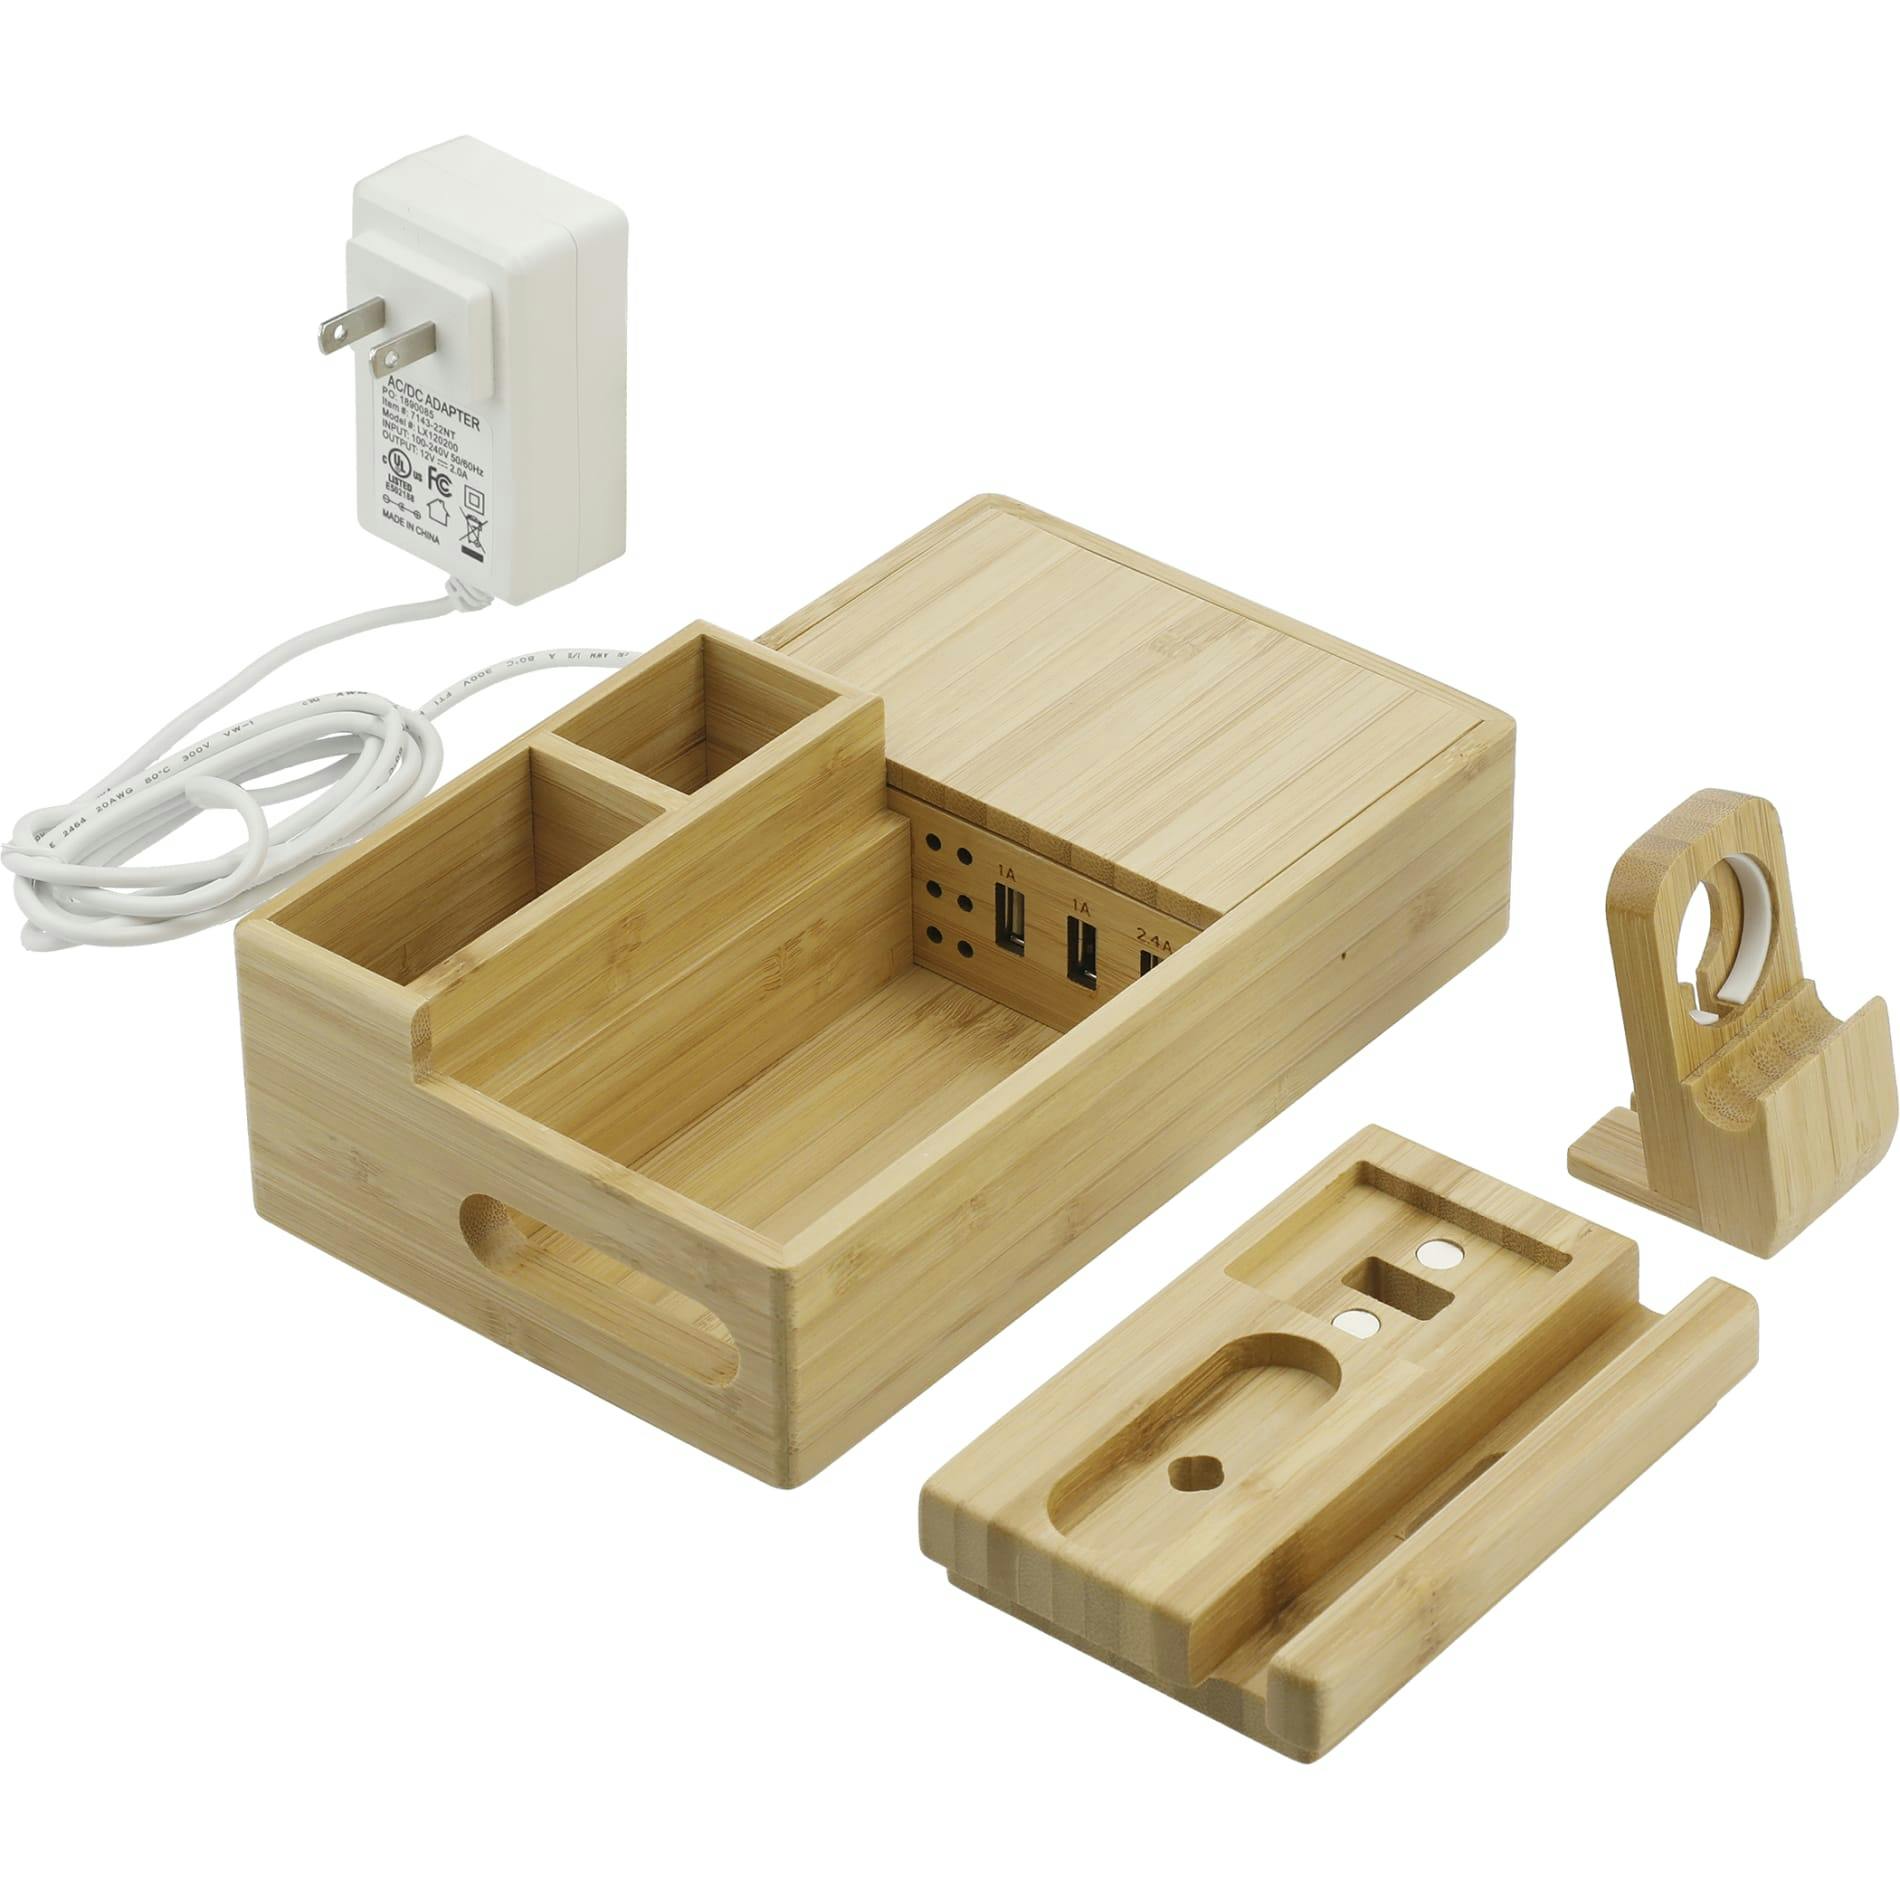 Bamboo Fast Wireless Charging Dock Station - additional Image 3